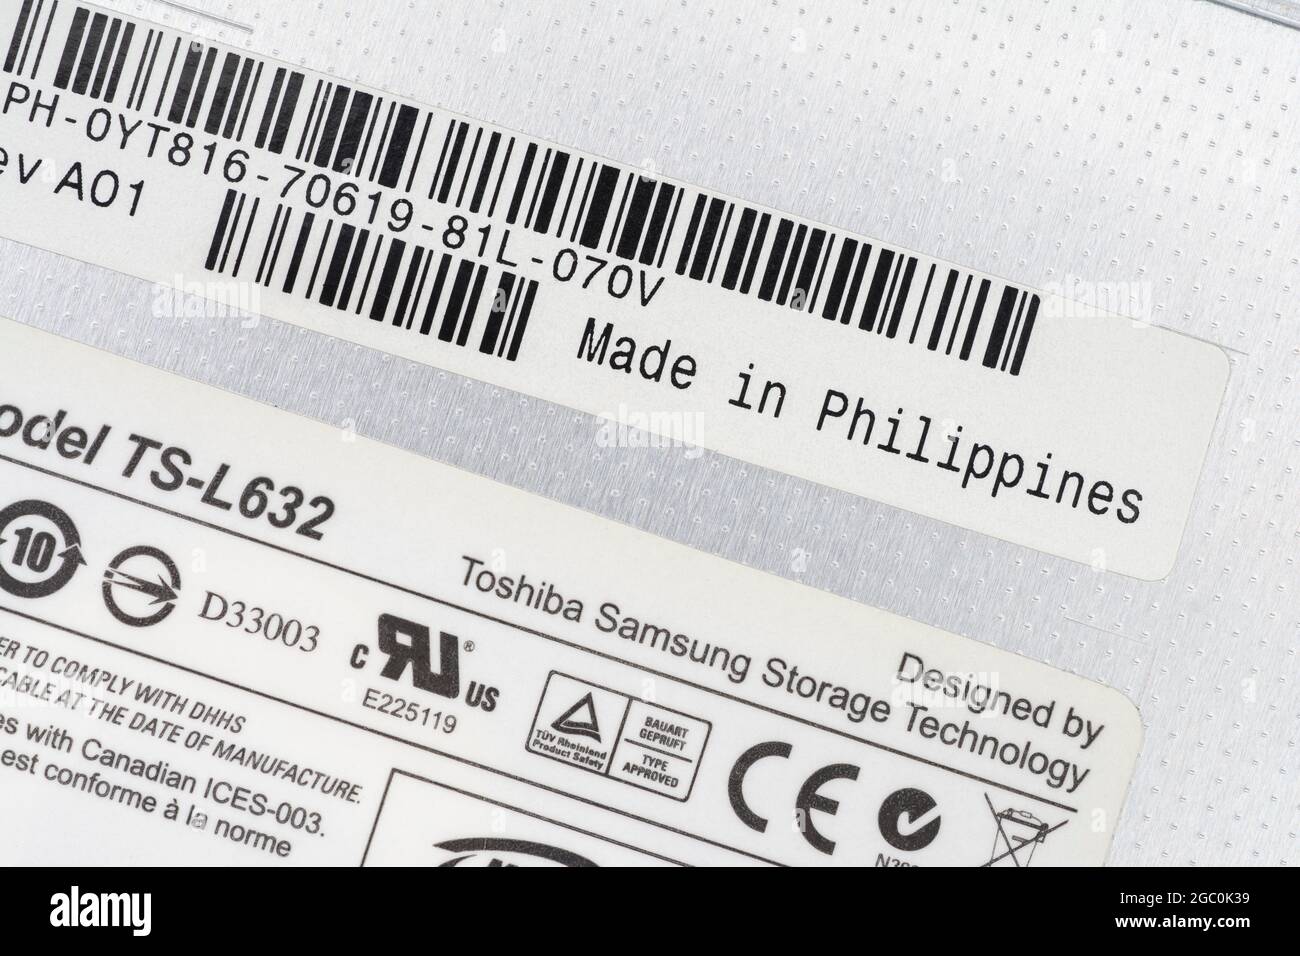 Paper labels on the back of a Toshiba-Samsung made removable laptop DVD Writer unit with made in the Philippines label. For offshoring parts. Stock Photo